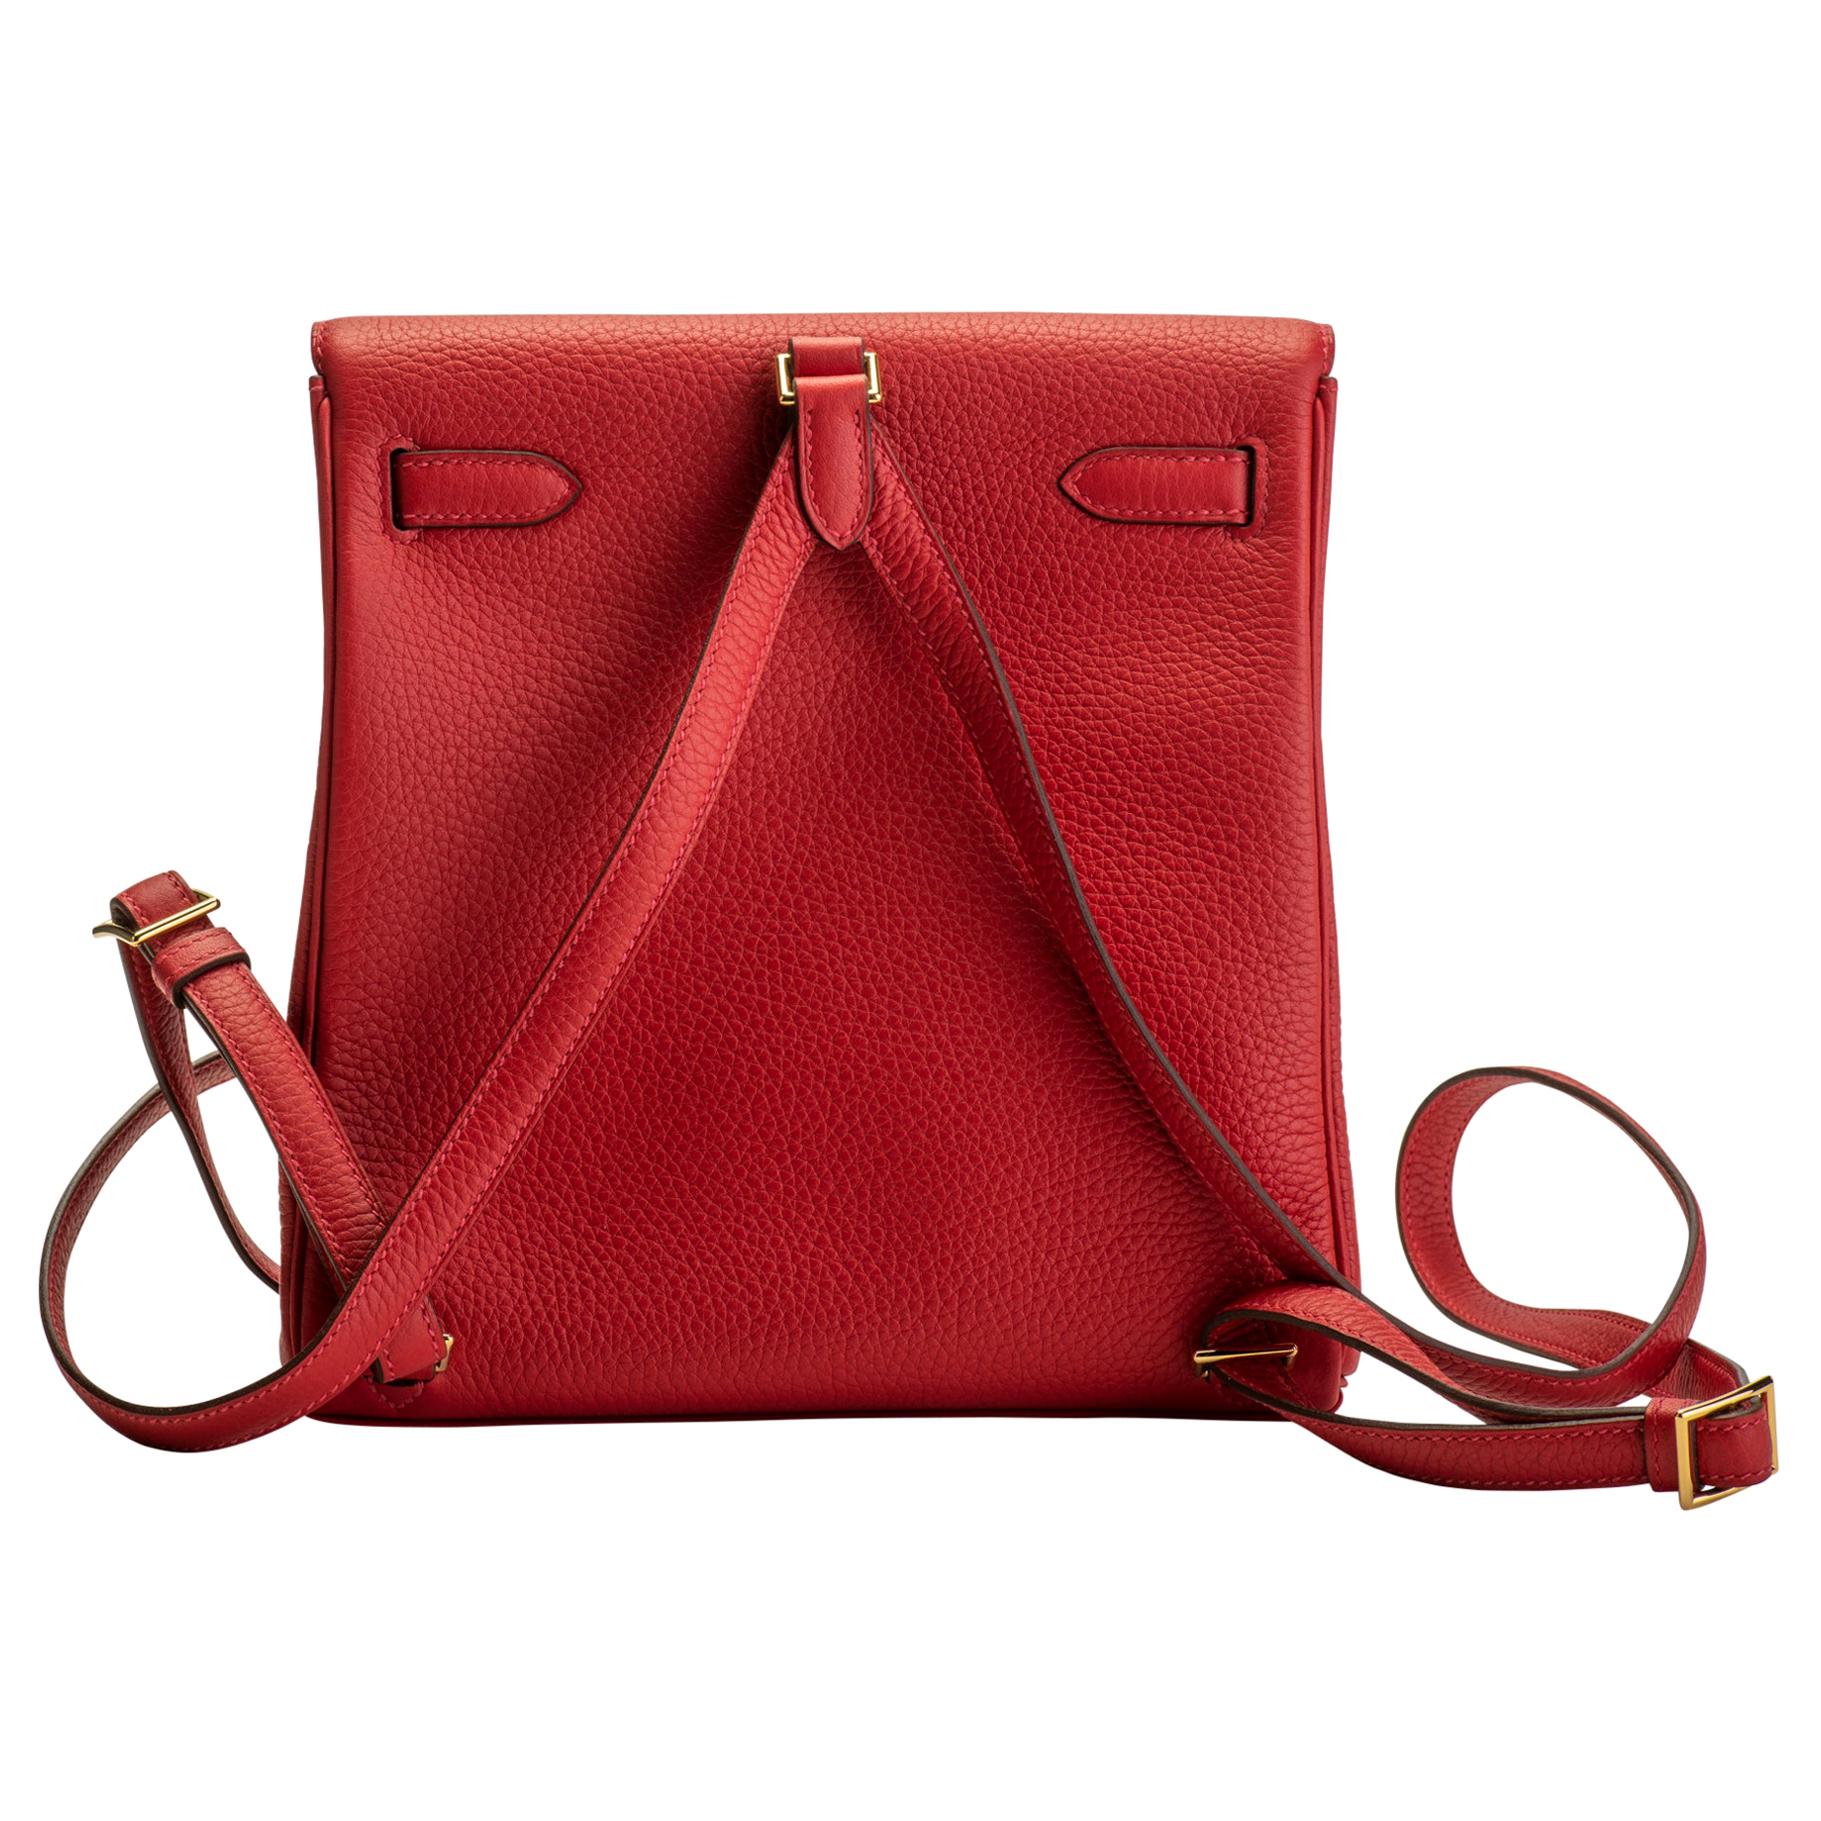 Hermès Kelly a Dos backpack in rouge casaque leather with goldtone hardware. Date stamp D for 2019. Brand new with full set: dust cover, booklet, box, ribbon, and shipping bag.